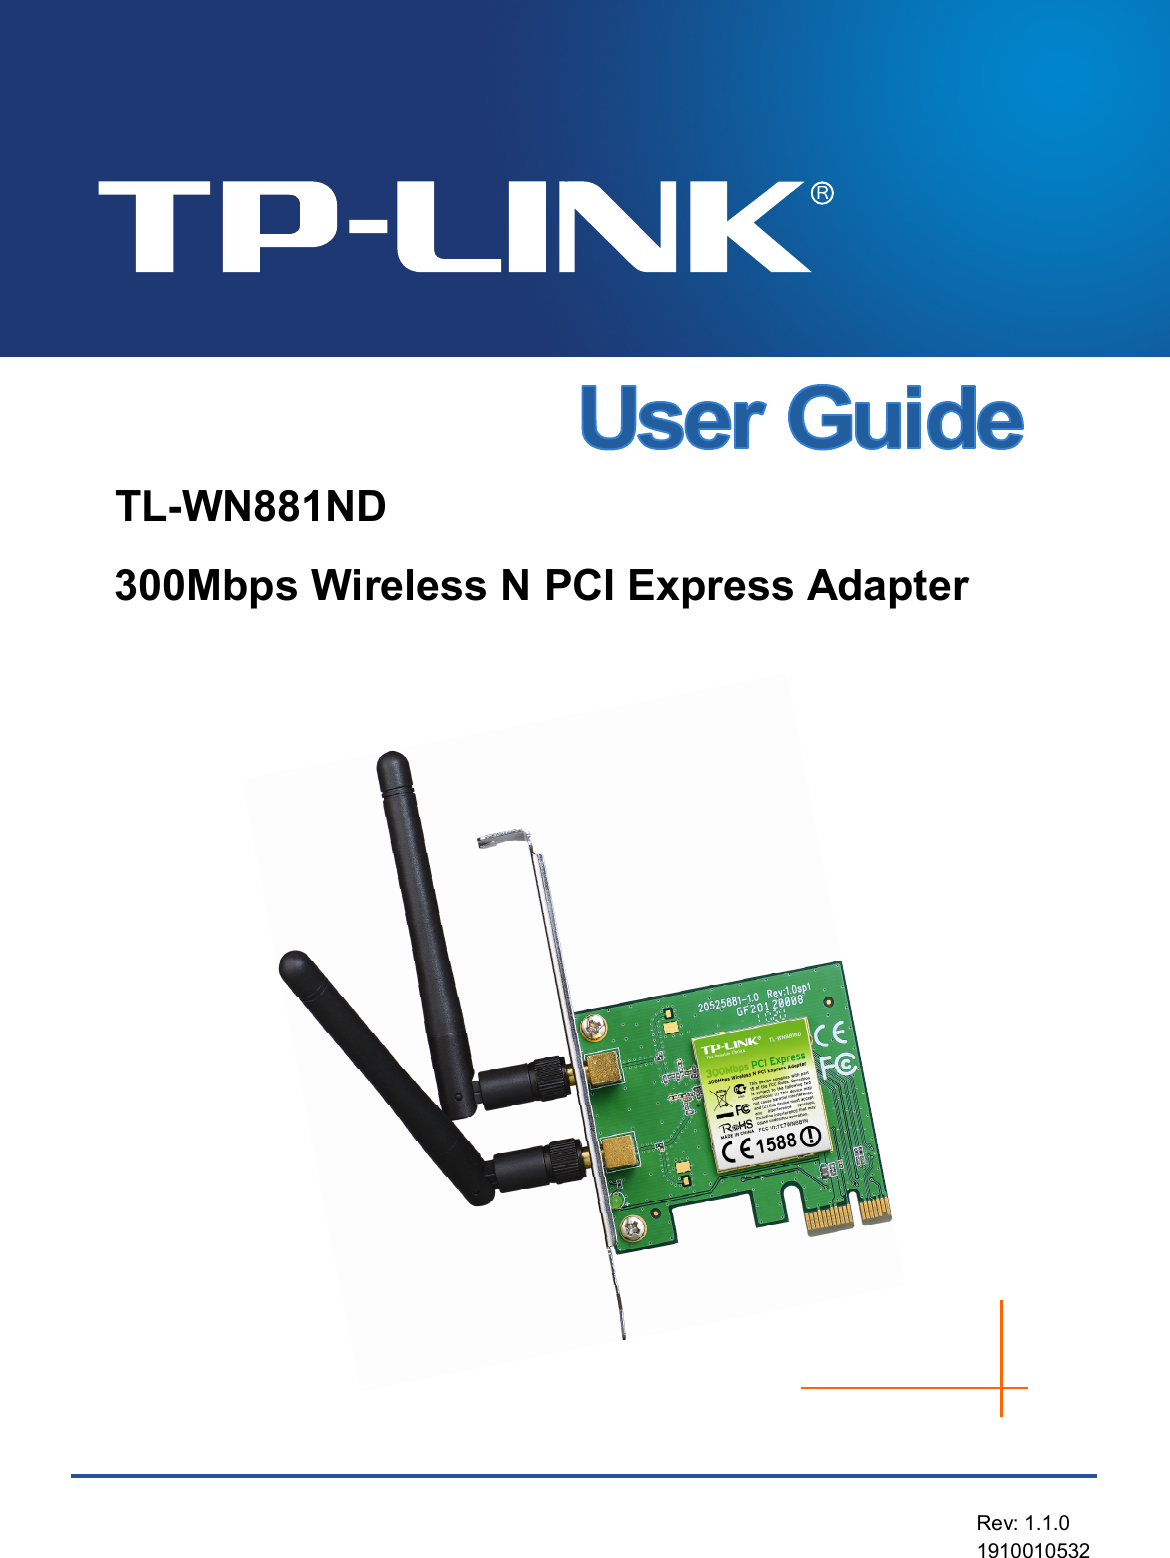    TL-WN881ND 300Mbps Wireless N PCI Express Adapter   Rev: 1.1.0 1910010532 